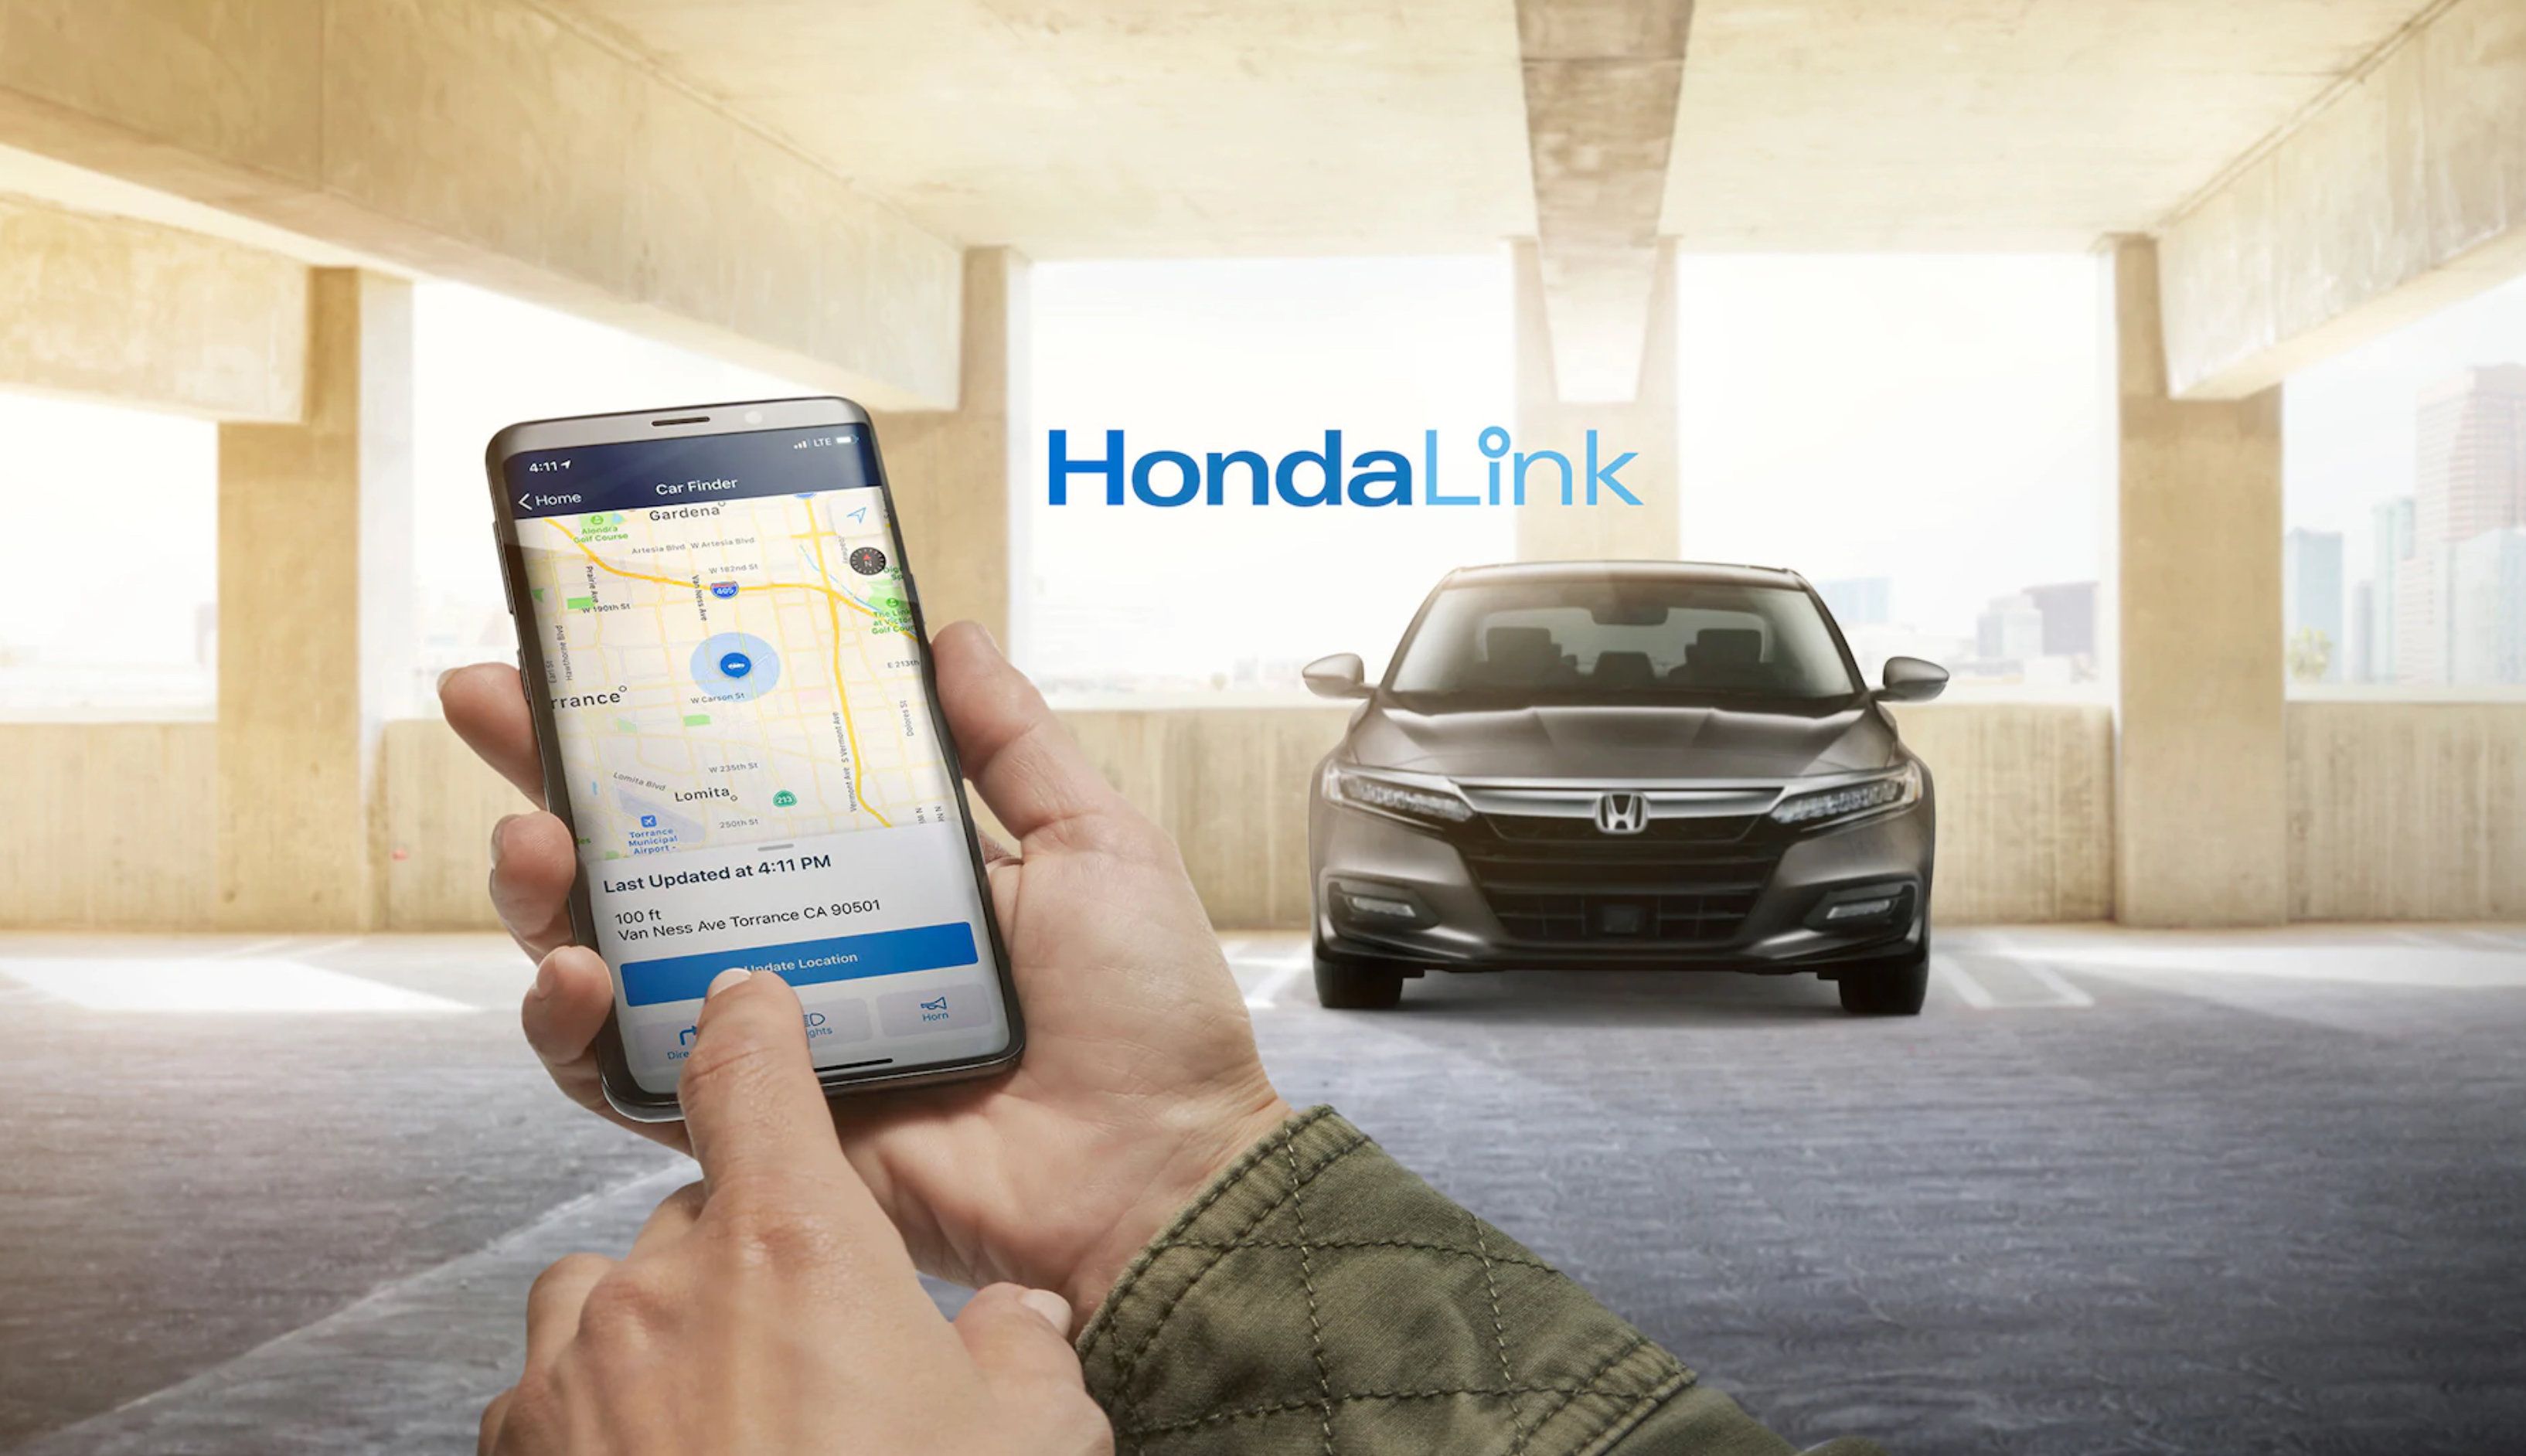 ​The HondaLink connected car smartphone app